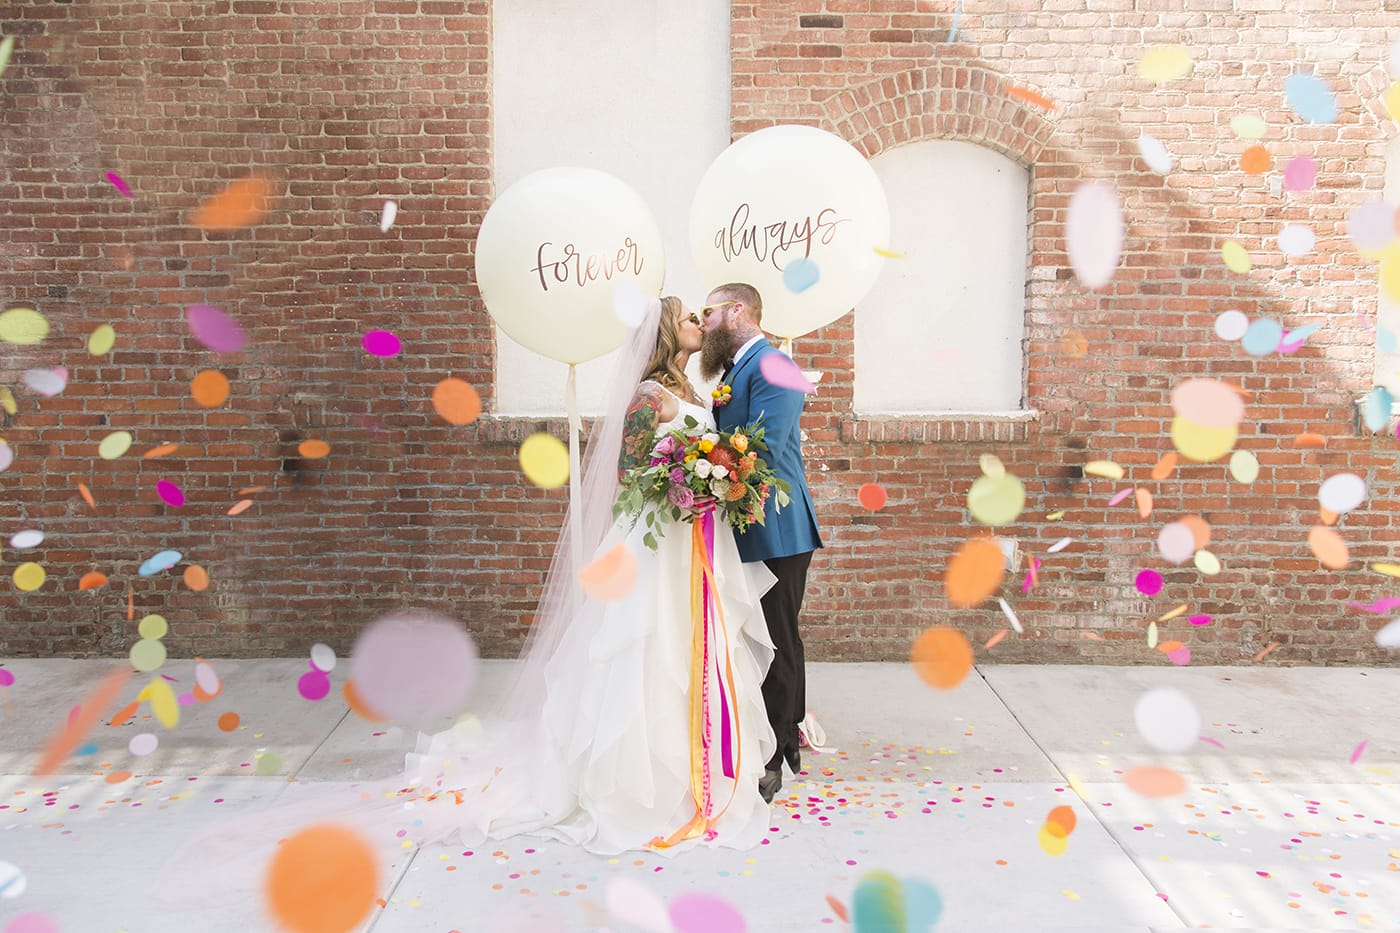 Punchy Citrus and Confetti-Themed Styled Shoot Featuring Blaire by Sottero & Midgley.